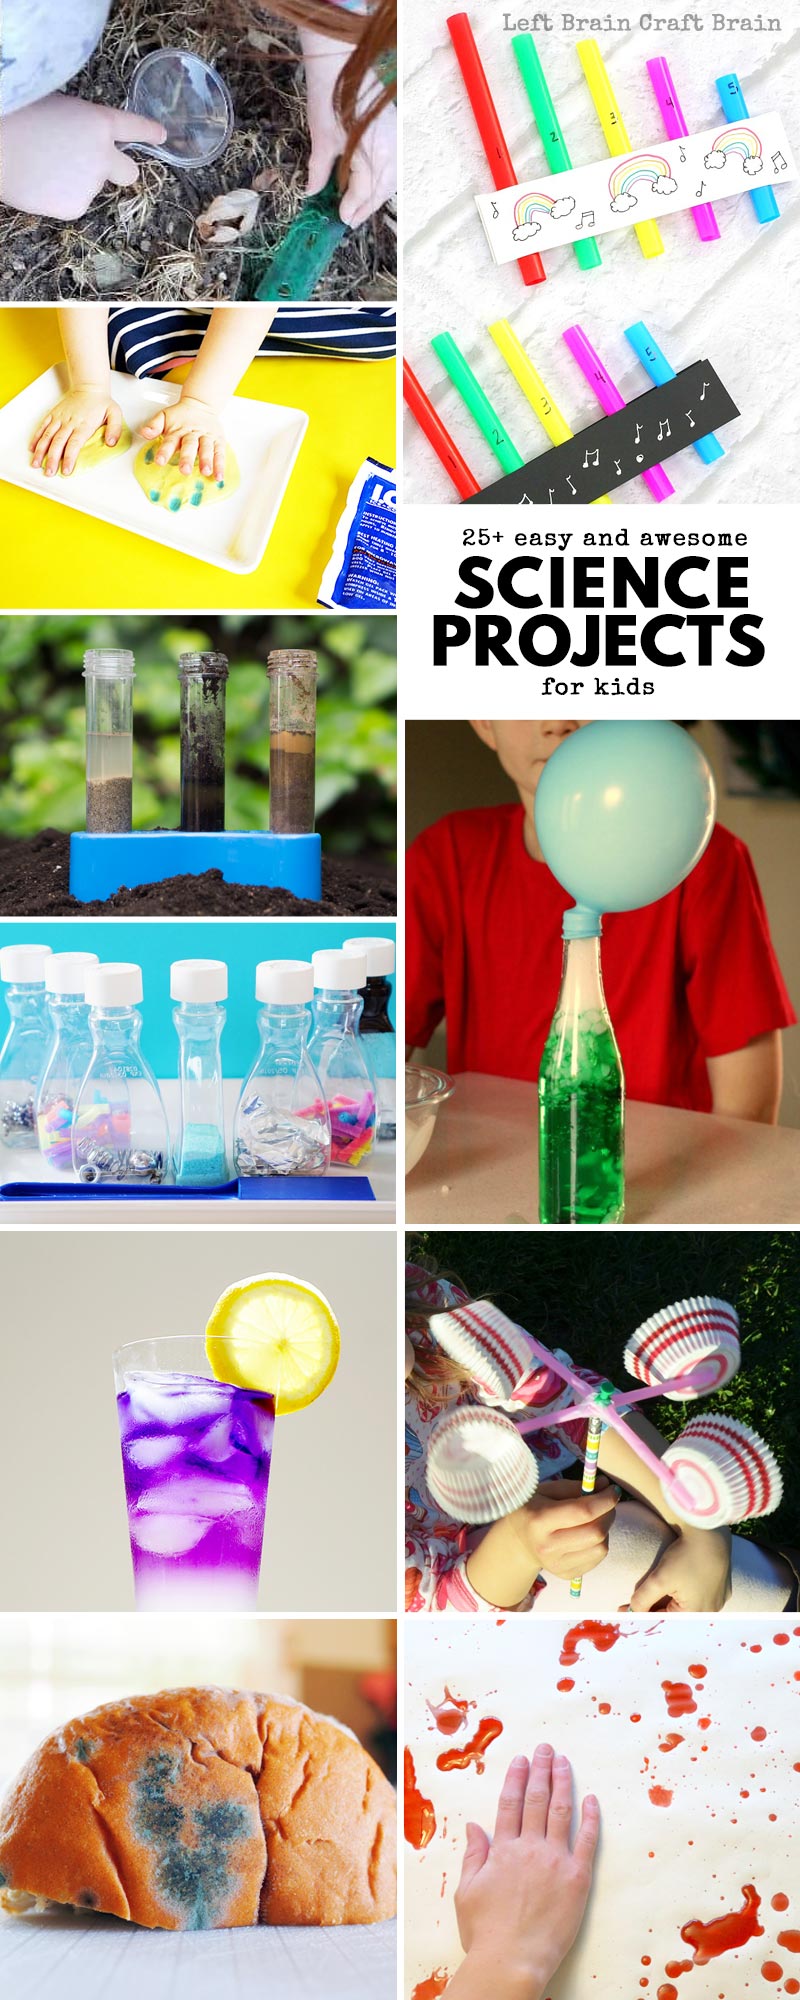 You'll find the coolest science projects for kids right here! 25+ easy and awesome projects perfect for home or school. Plus they're made even better with integrated STEM and STEAM.